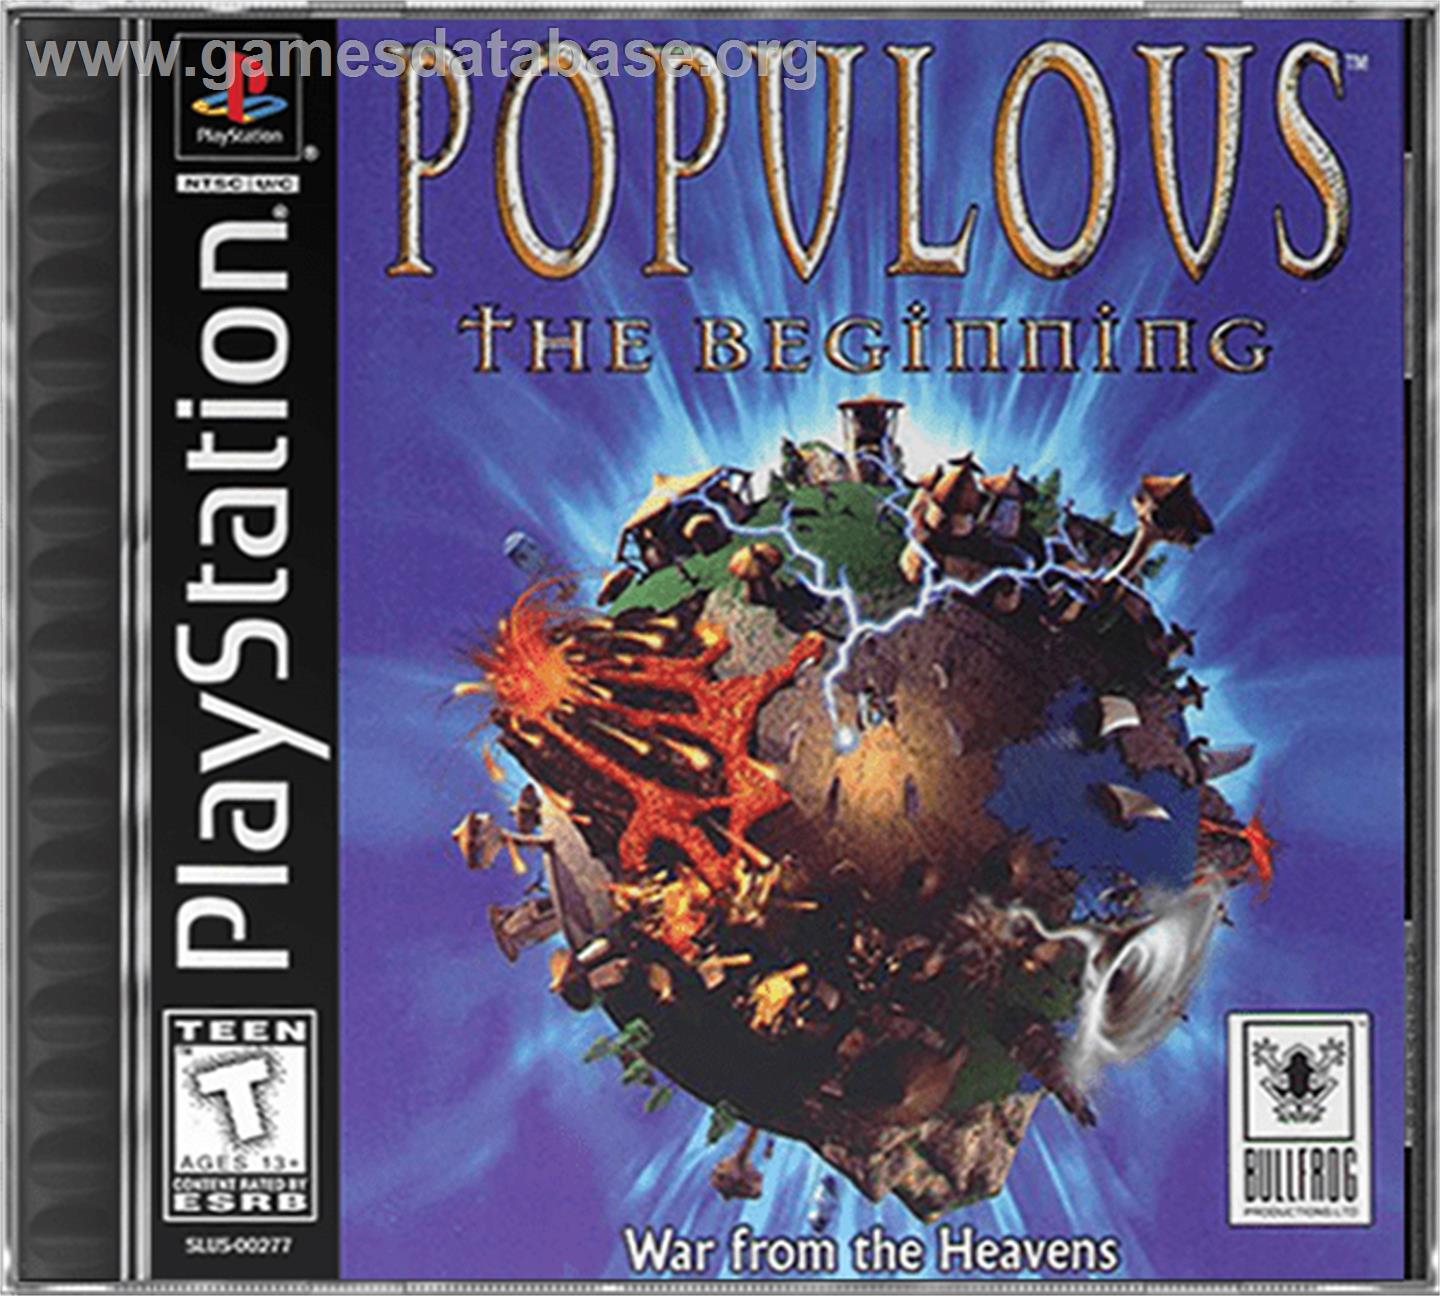 Populous: The Beginning - Sony Playstation - Artwork - Box